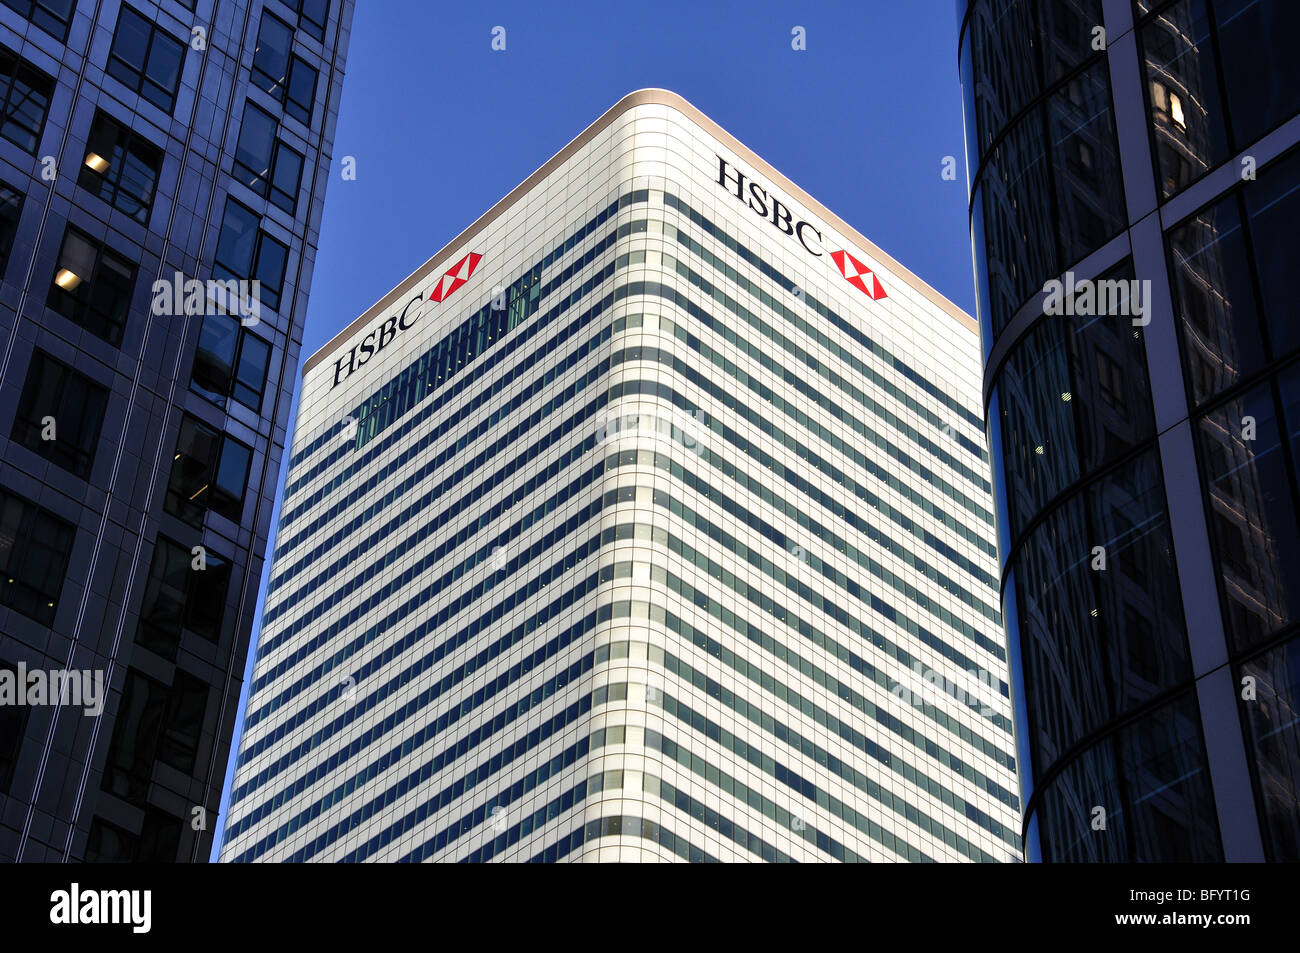 HSBC Bank Building, Cabot Square, Canary Wharf, Londres, Angleterre, Royaume-Uni Banque D'Images